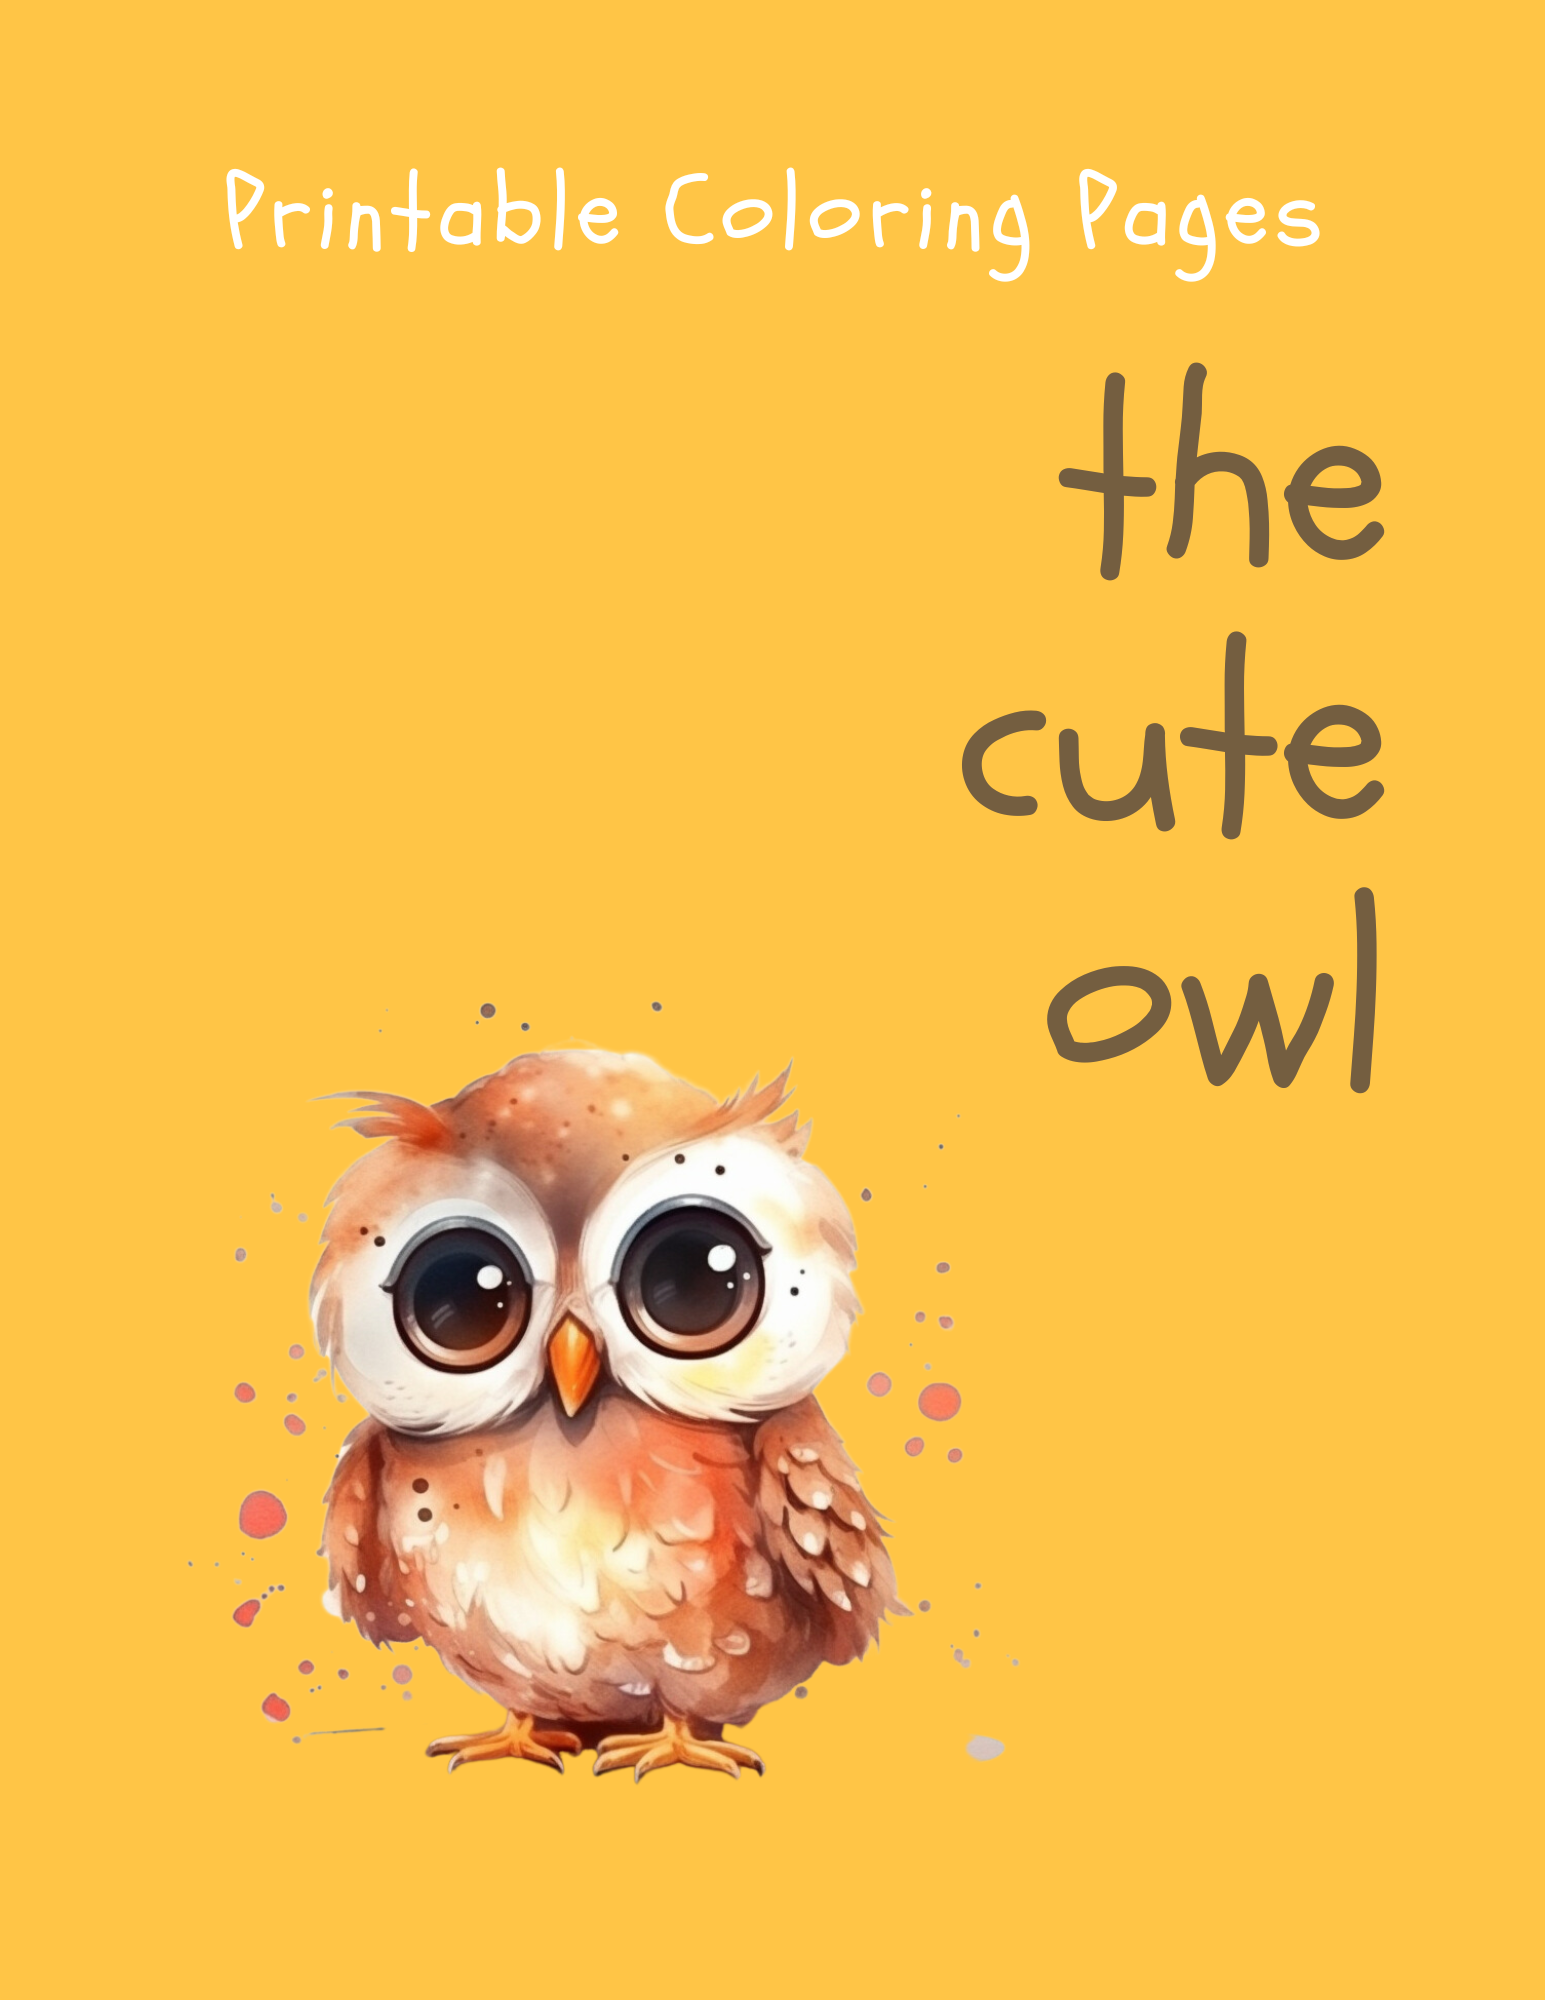 Printable (Digital) Owl Coloring Pages: WhimsyOwls Coloring Collection